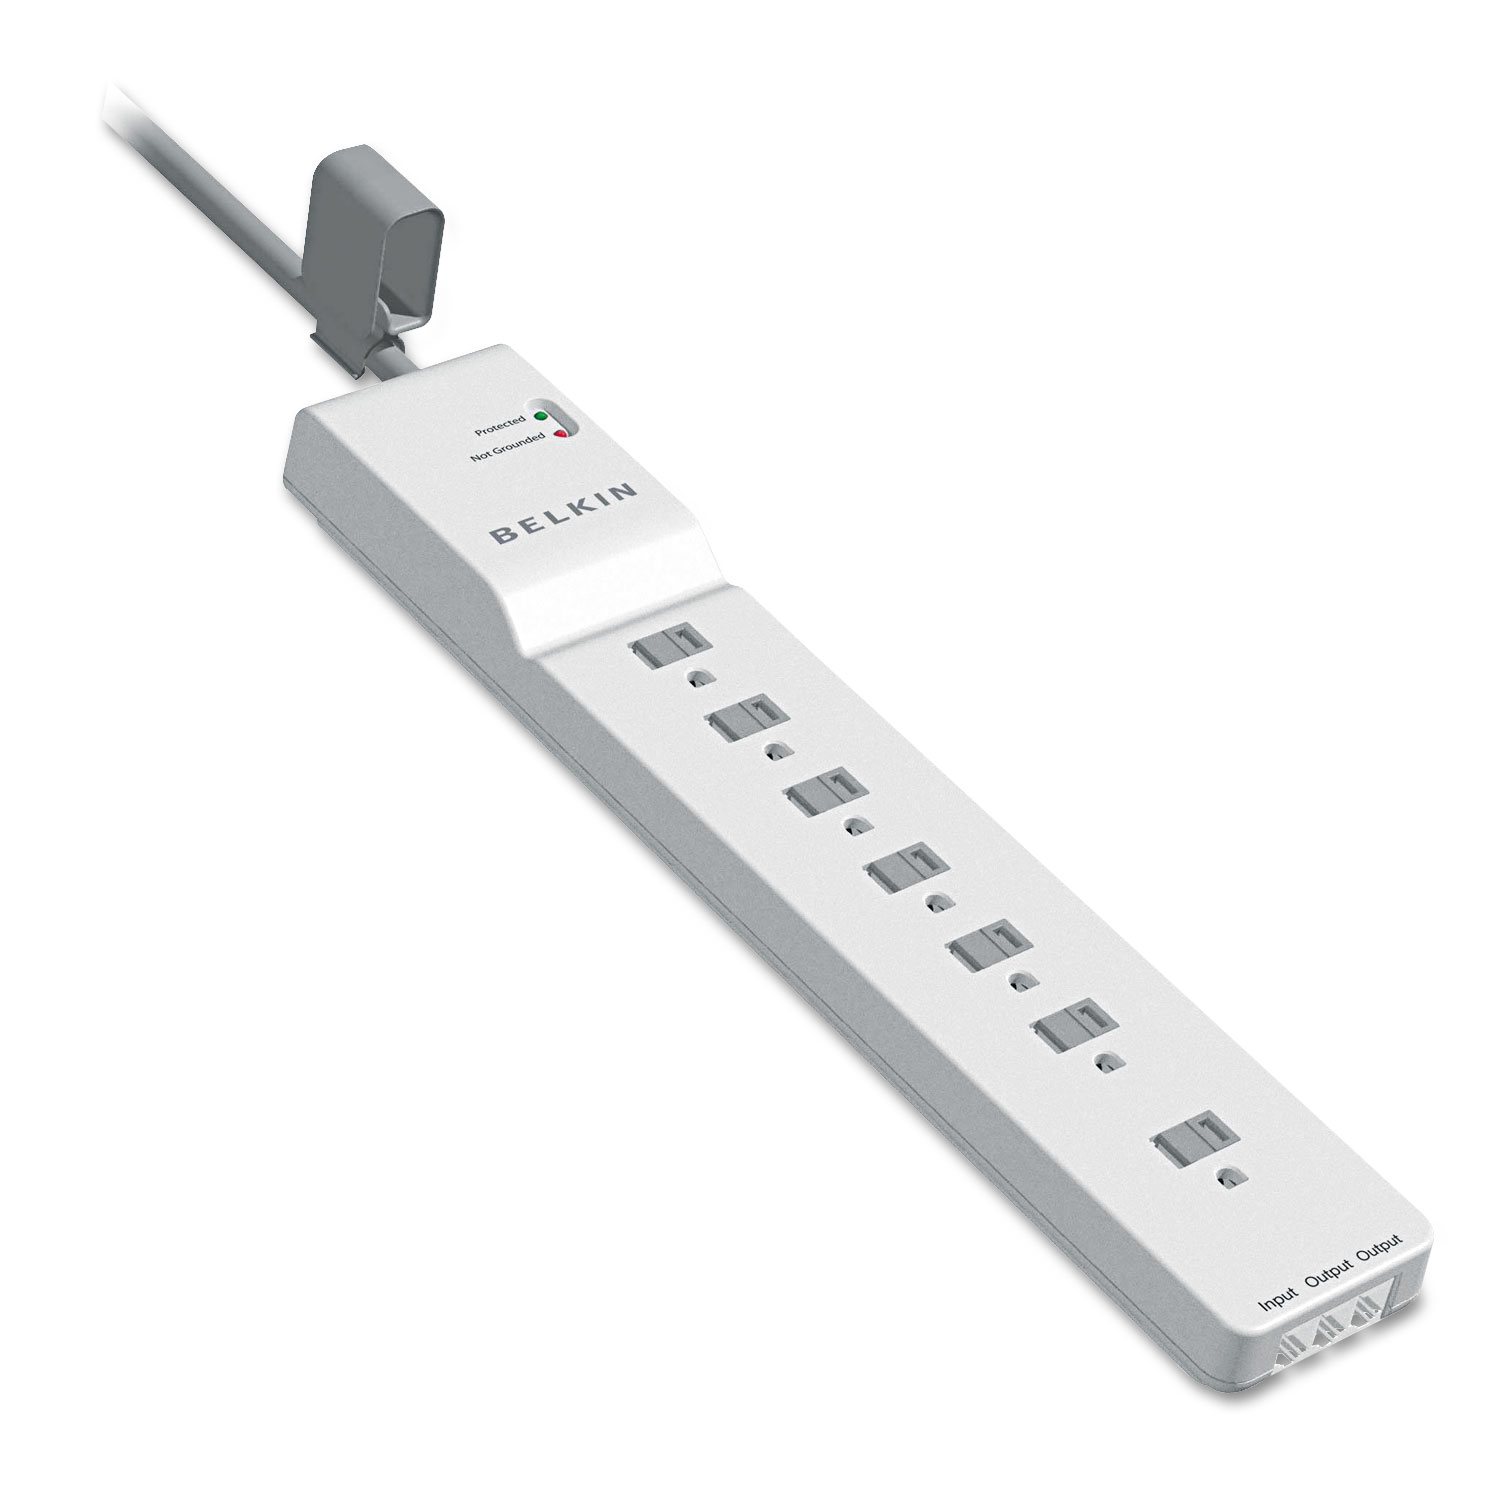  Belkin BE107200-12 Home/Office Surge Protector, 7 Outlets, 12 ft Cord, 2160 Joules, White (BLKBE10720012) 